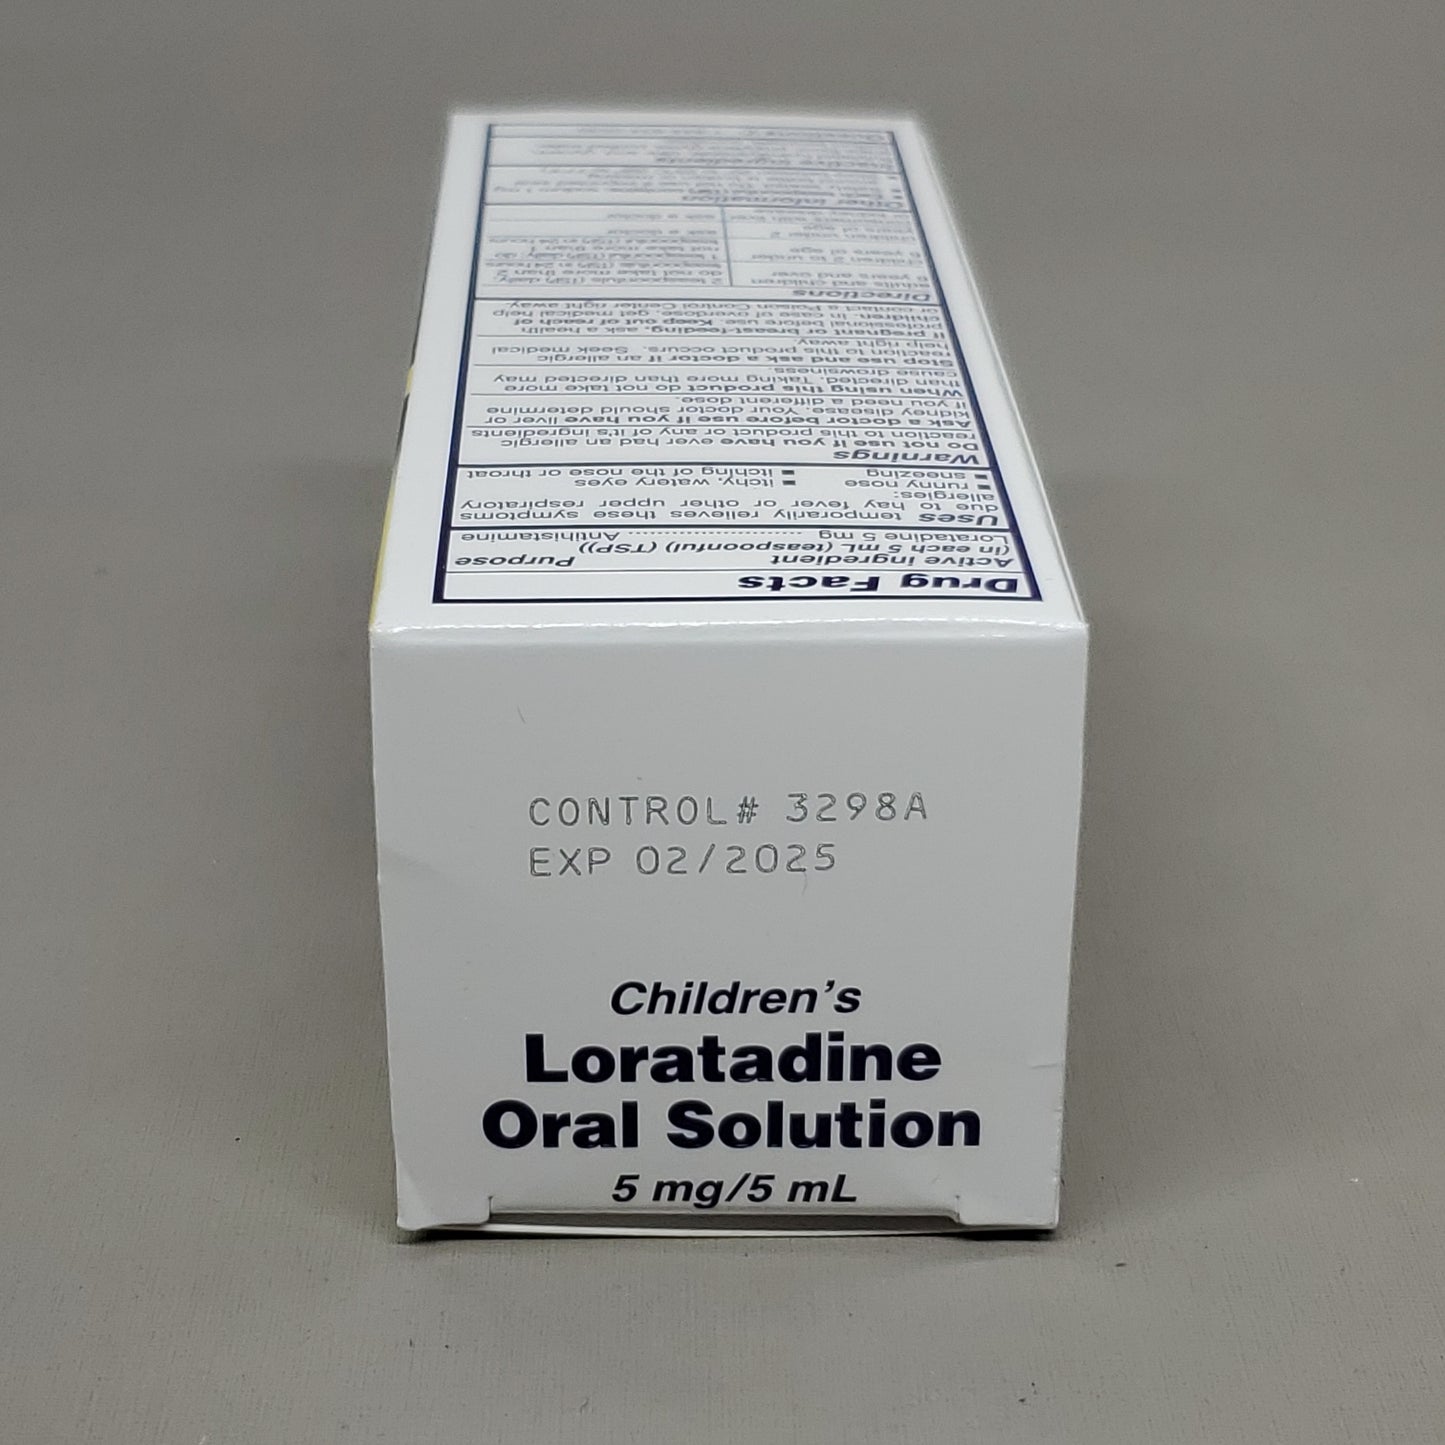 SILARX 12-PACK! Children's Loratadine Oral Solution Non-Drowsy 24-HR Allergy Relief 02/25